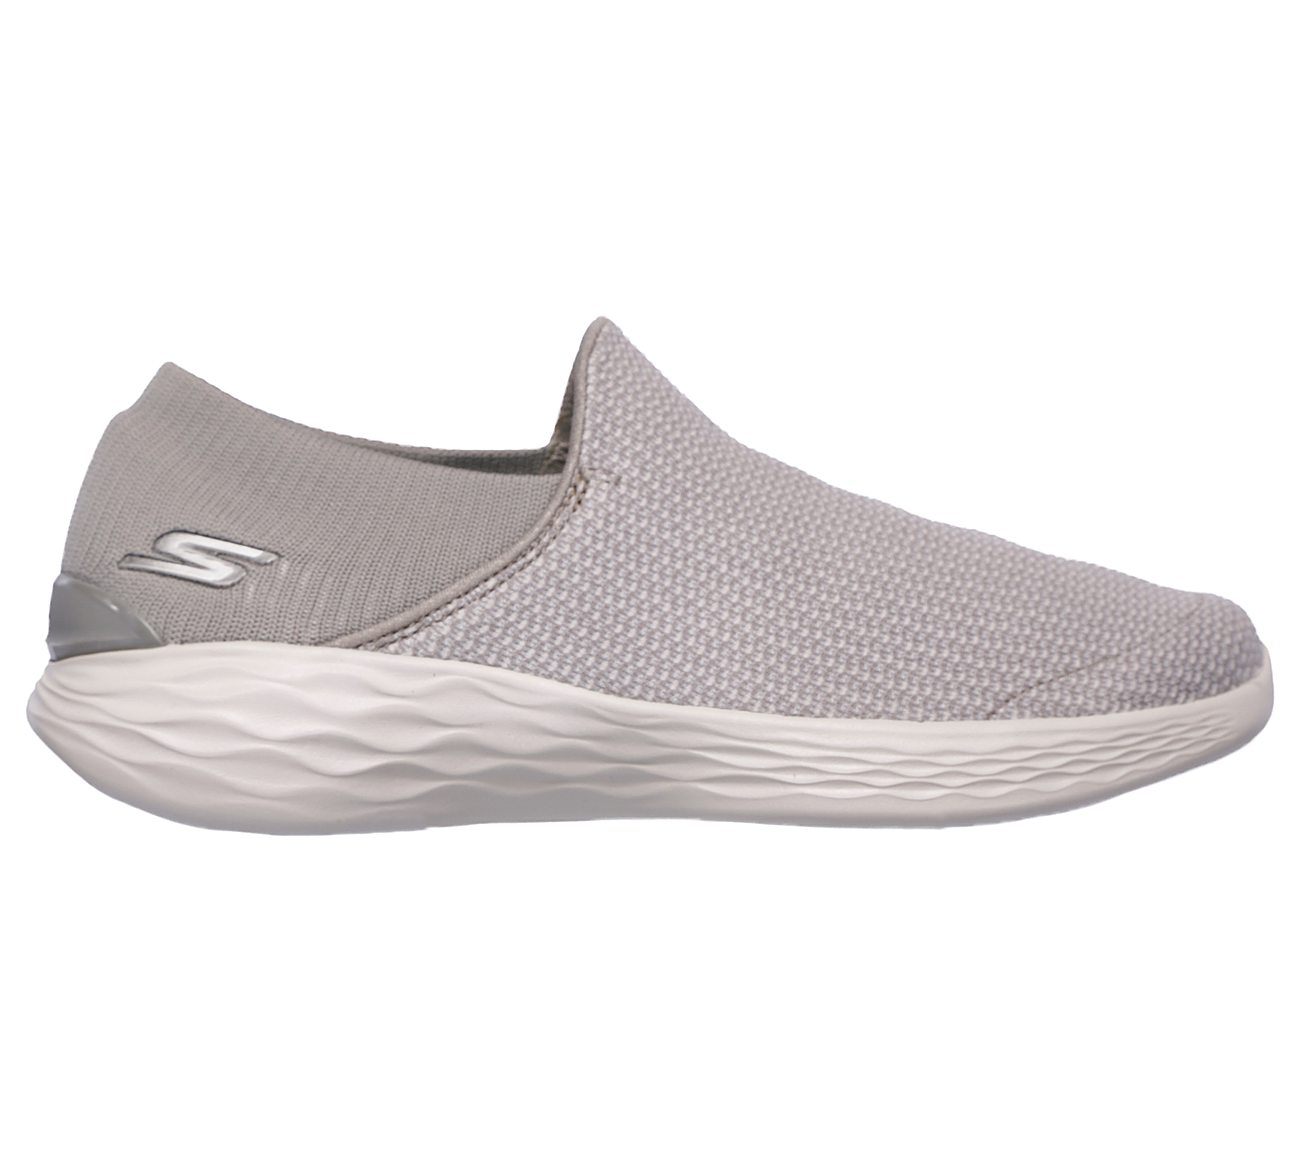 Mantra YOU by skechers Shoes